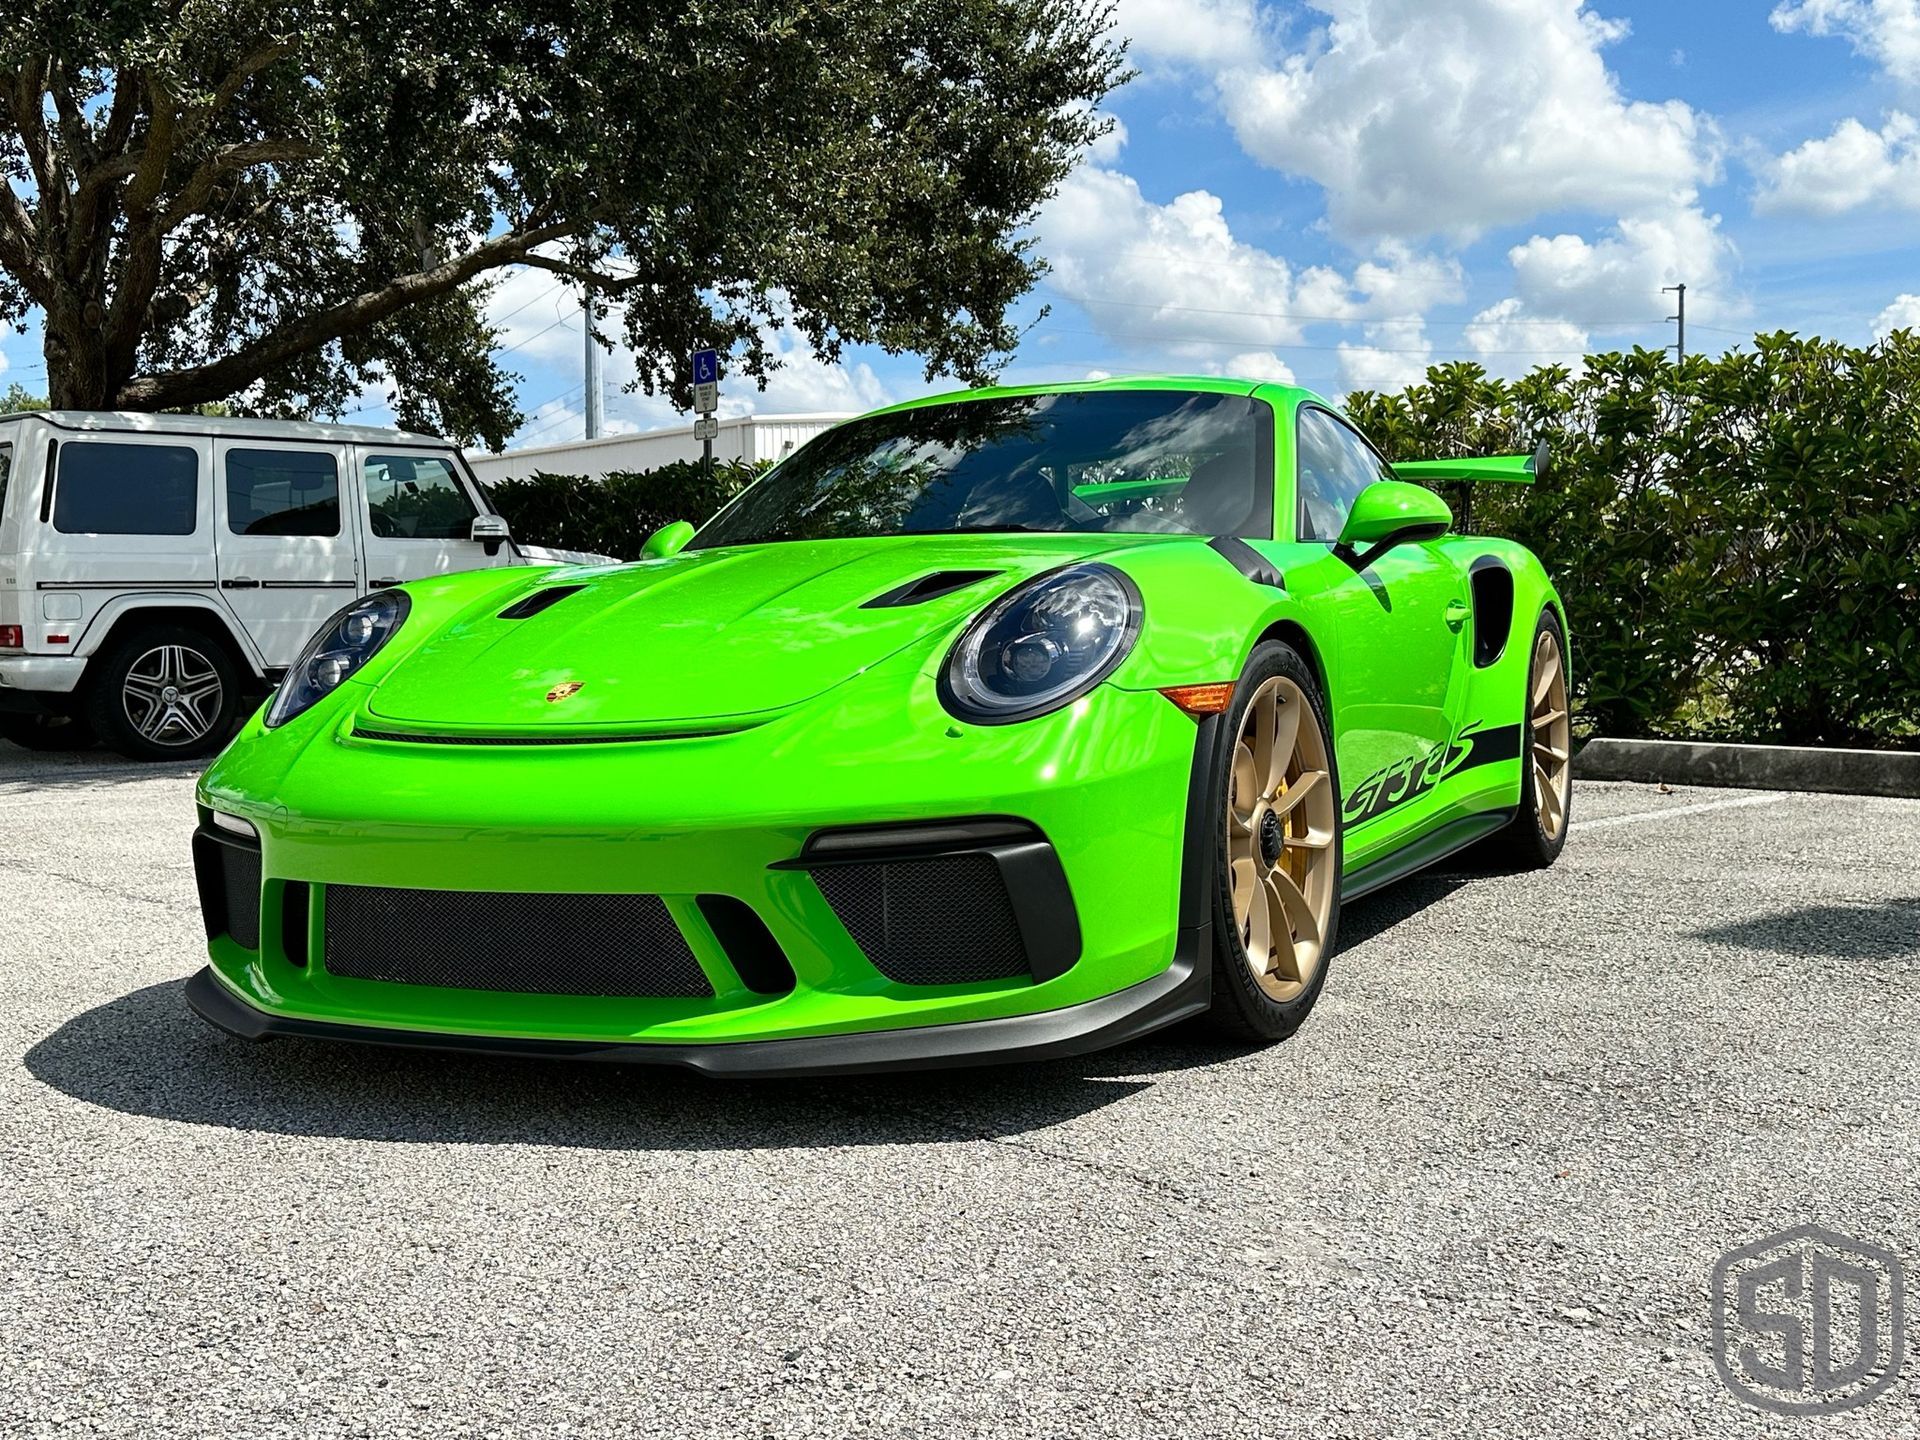 The GT3 RS is a True Testament to Porsche's Commitment to Excellence. This 2019 Lizard Green Porsche